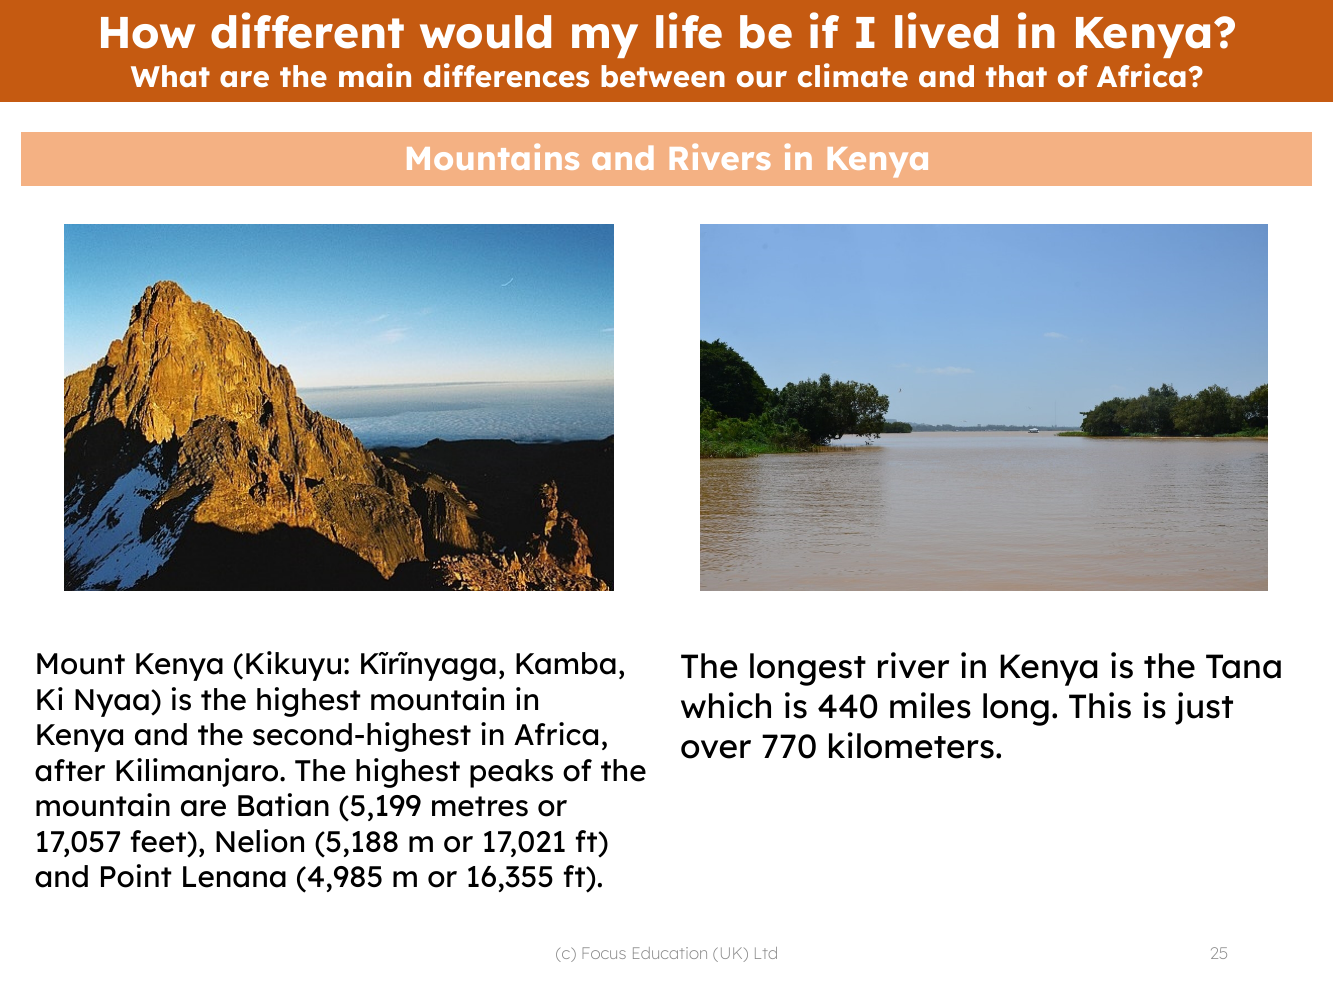 Mountains and rivers in Kenya and England